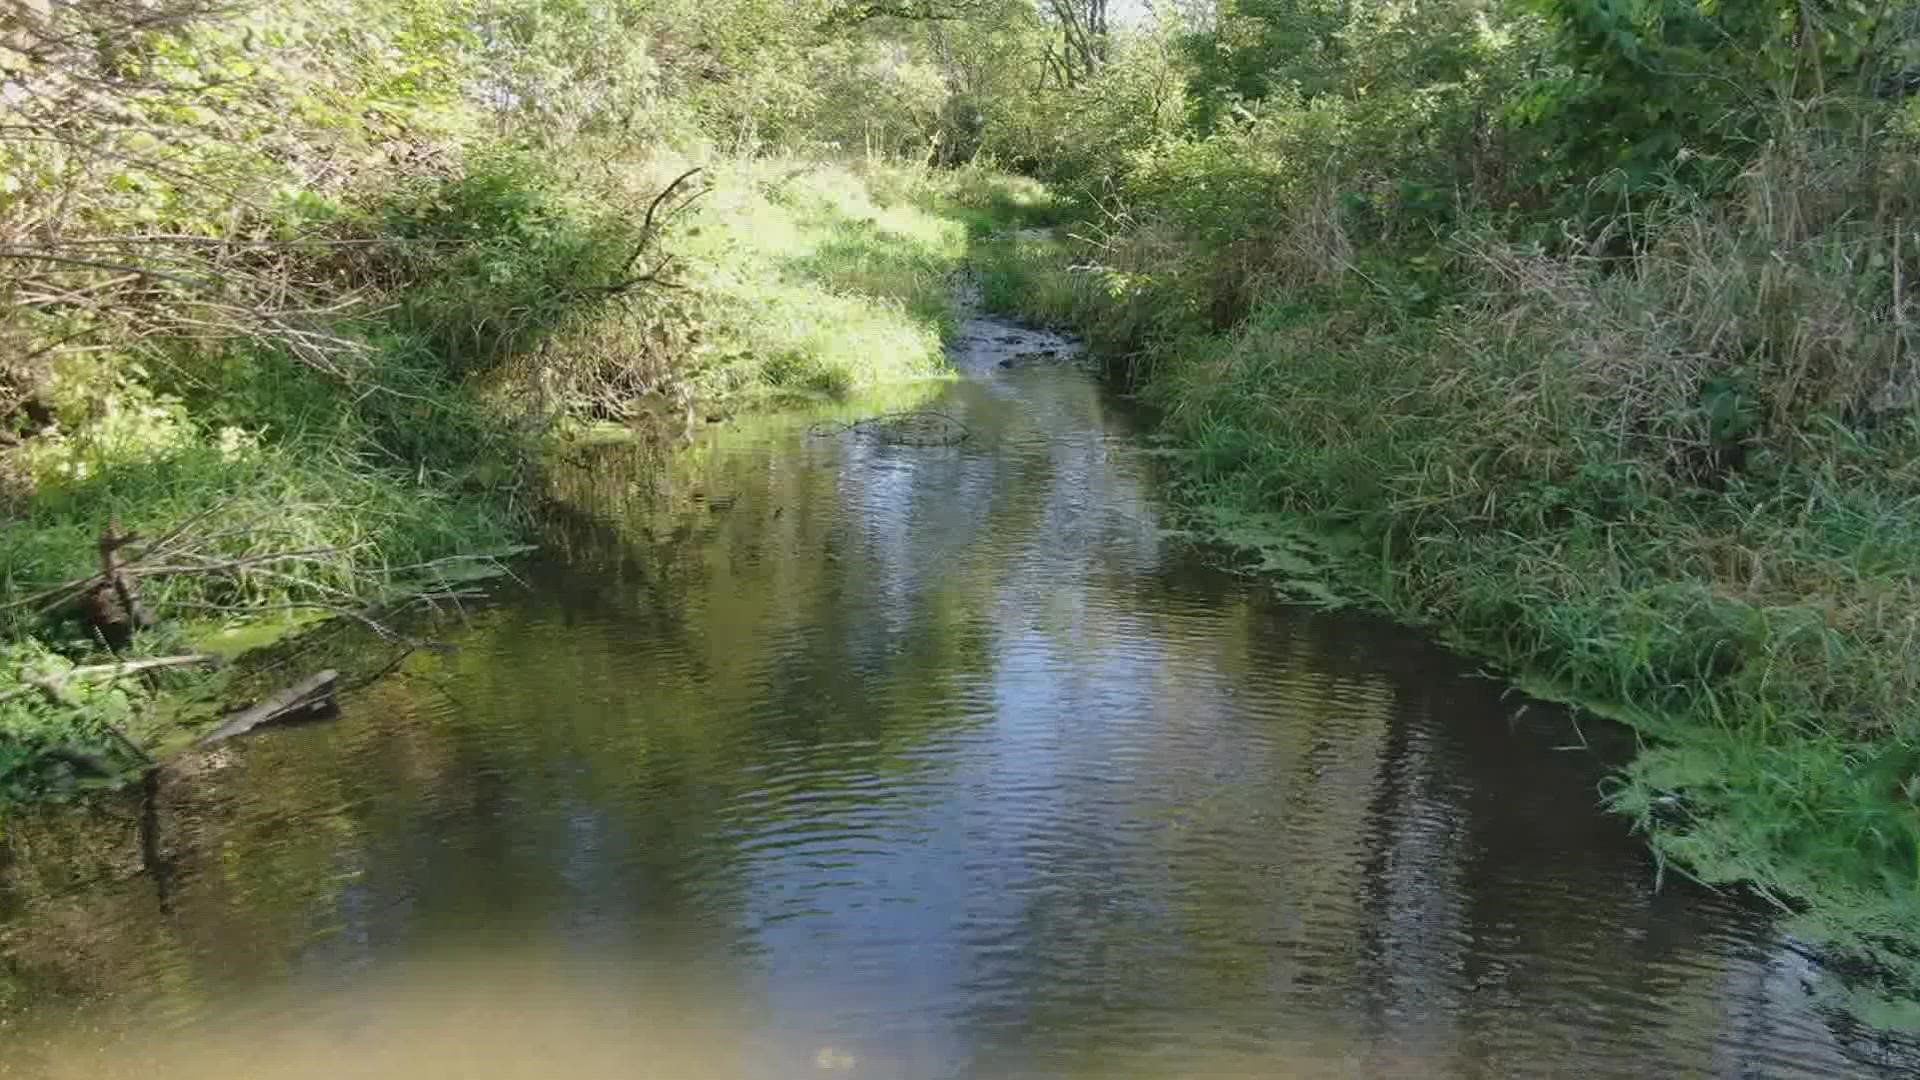 For over 200 years, the creek was named Negro Creek after the area's first Black settler, but now it's being changed to Adams Creek, the man's name.